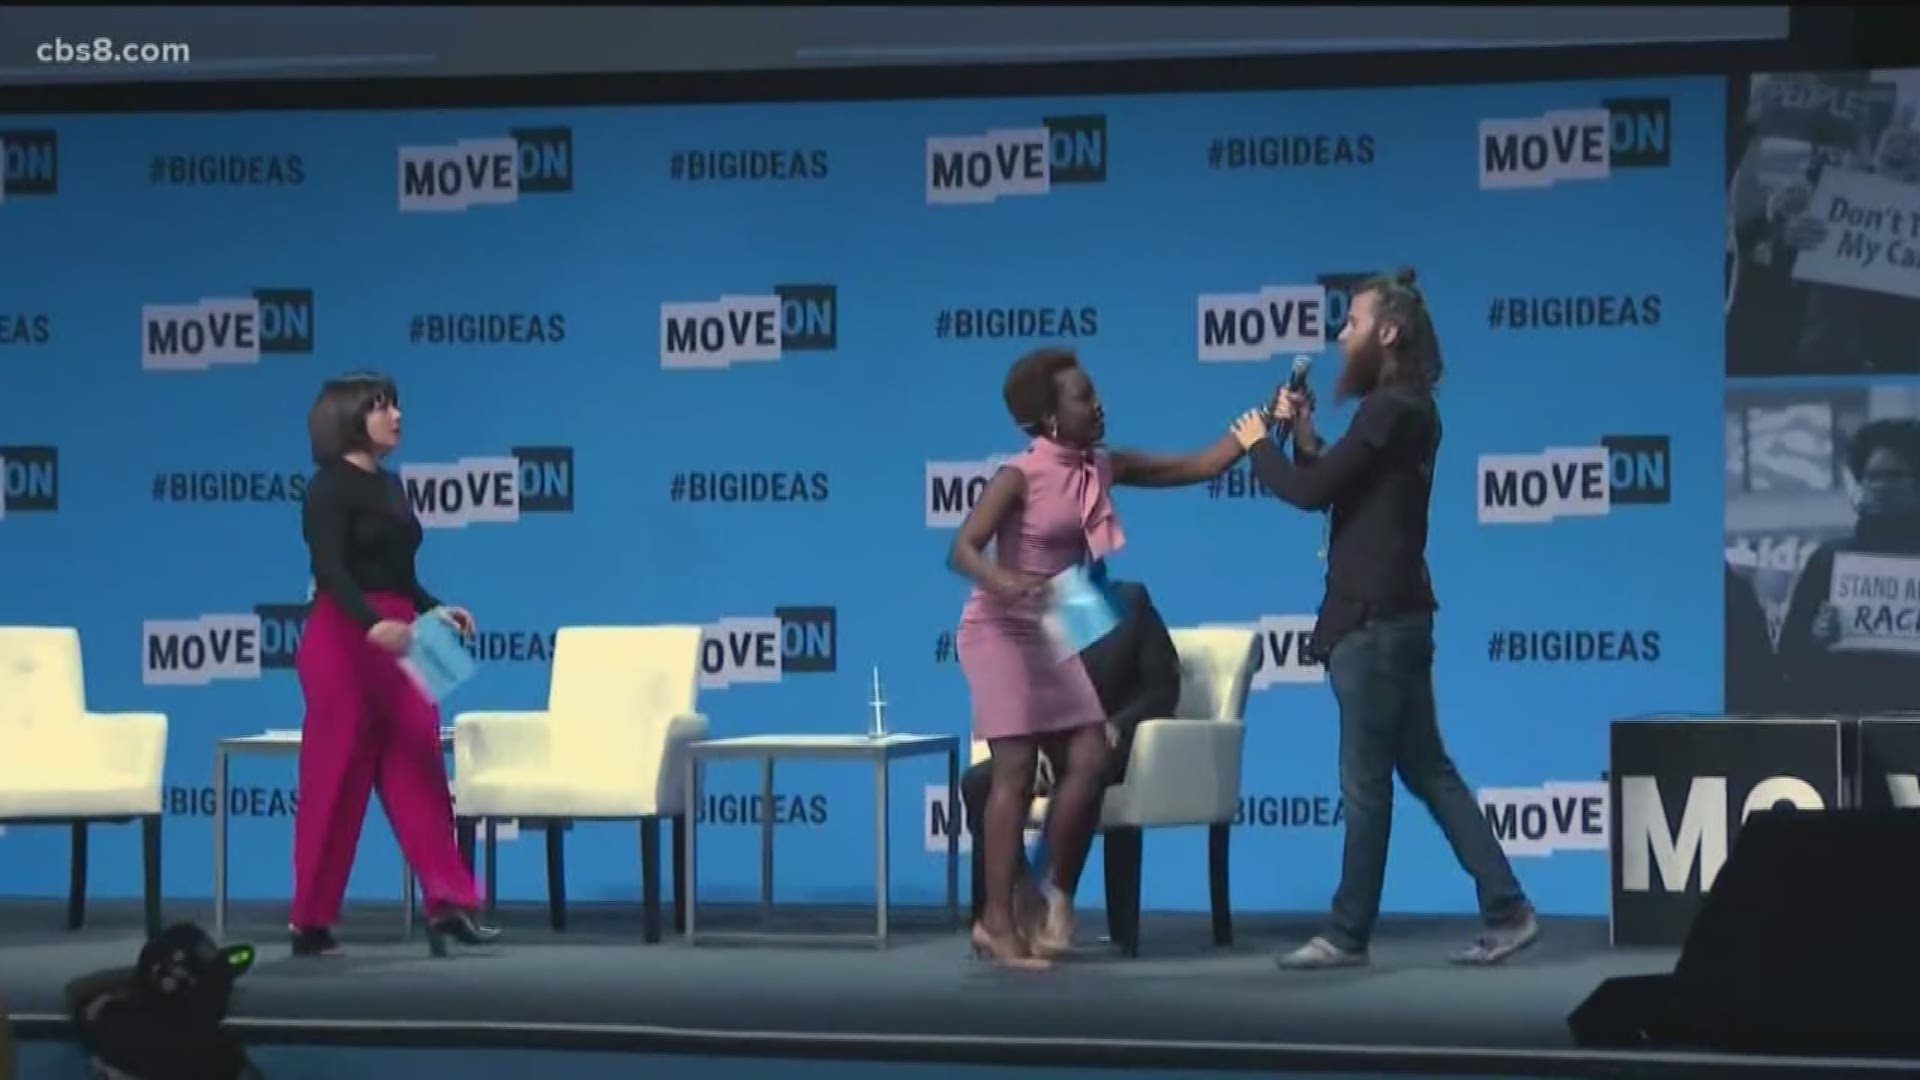 While Harris was speaking at a panel hosted by the liberal group MoveOn in San Francisco, a man jumped on stage disrupting the presidential candidate.